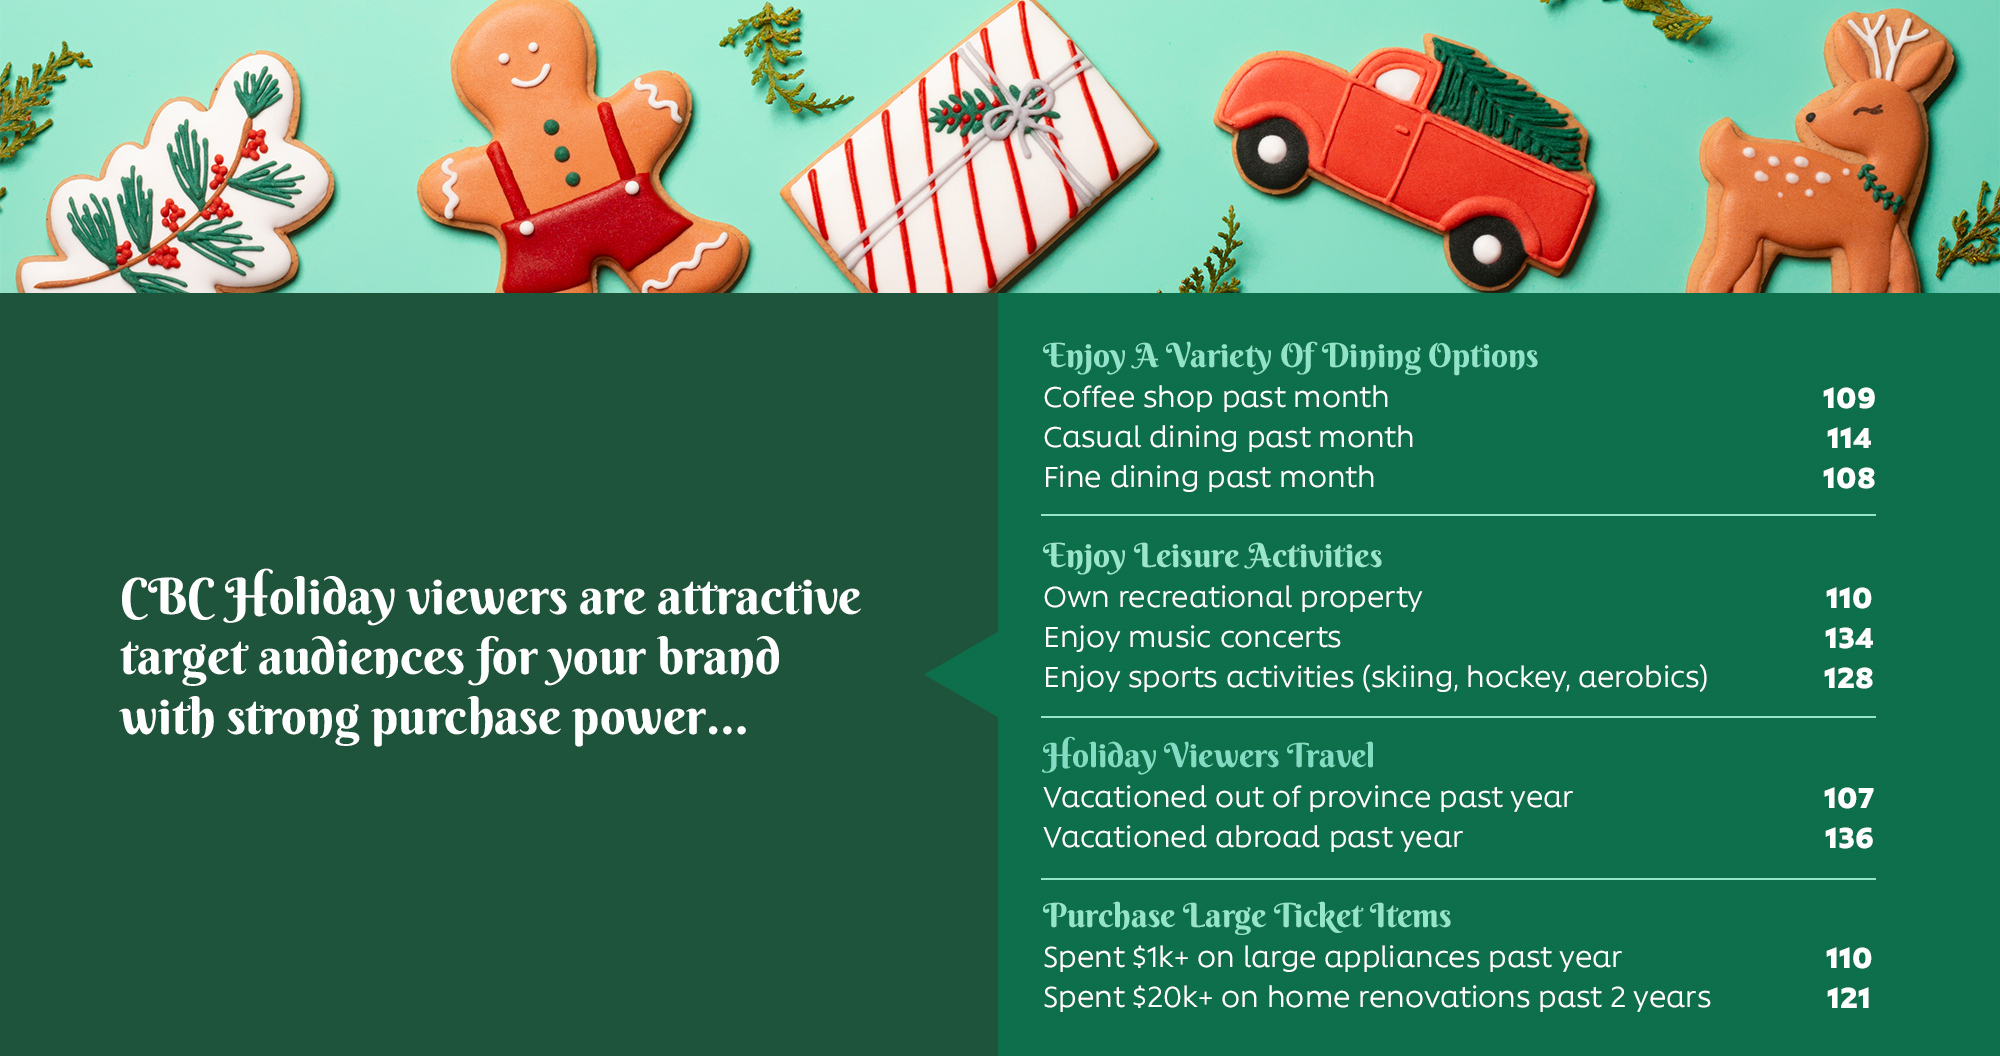 CBC HOLIDAY VIEWERS are attractive target audiences for your brand with strong purchase power.